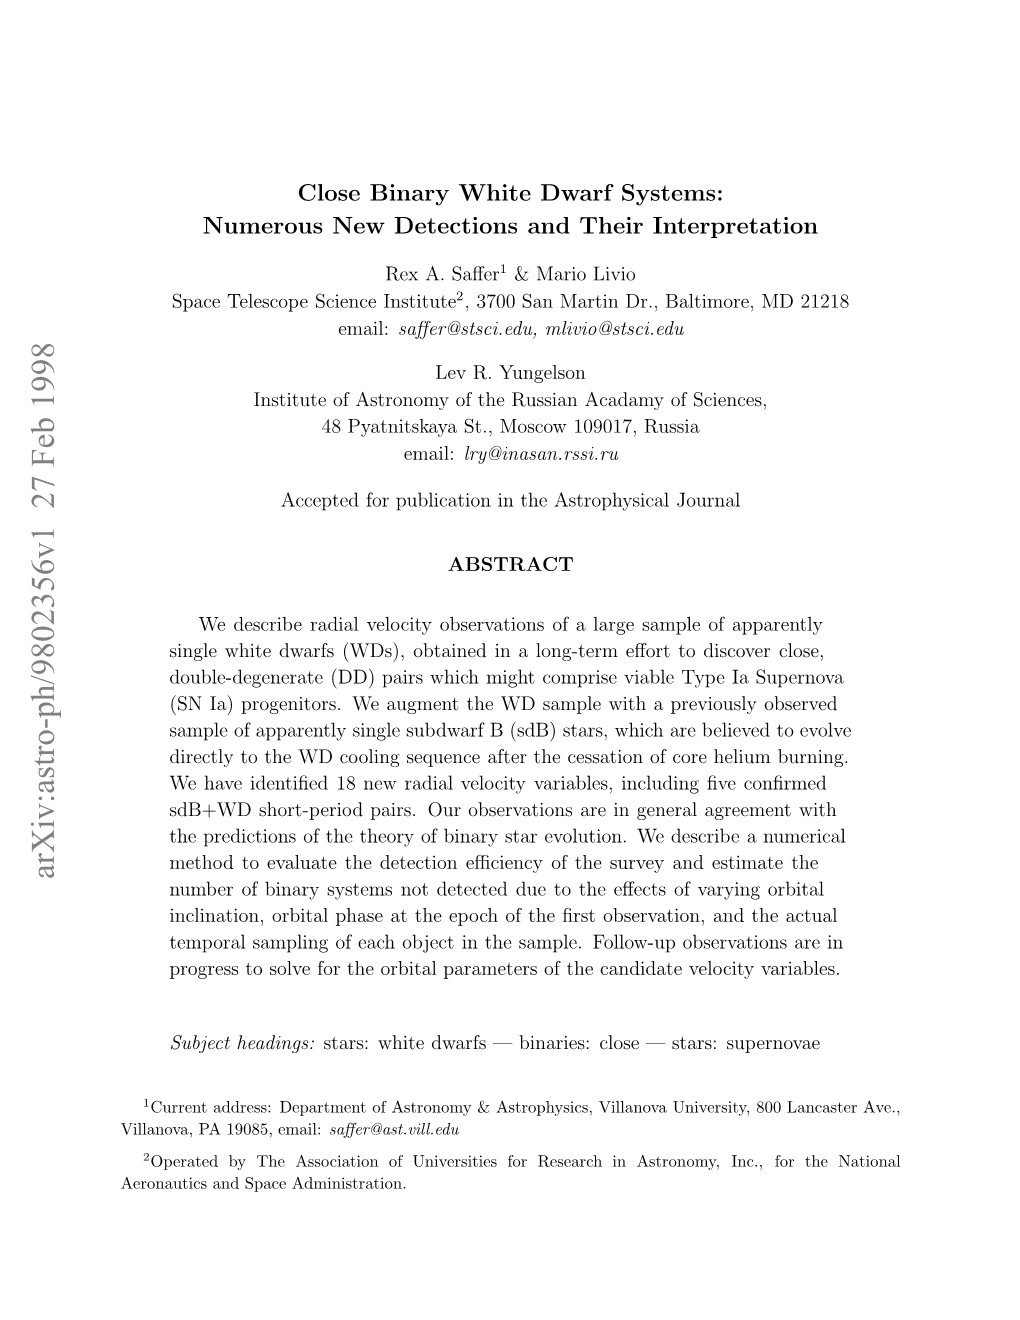 Close Binary White Dwarf Systems: Numerous New Detections and Their Interpretation